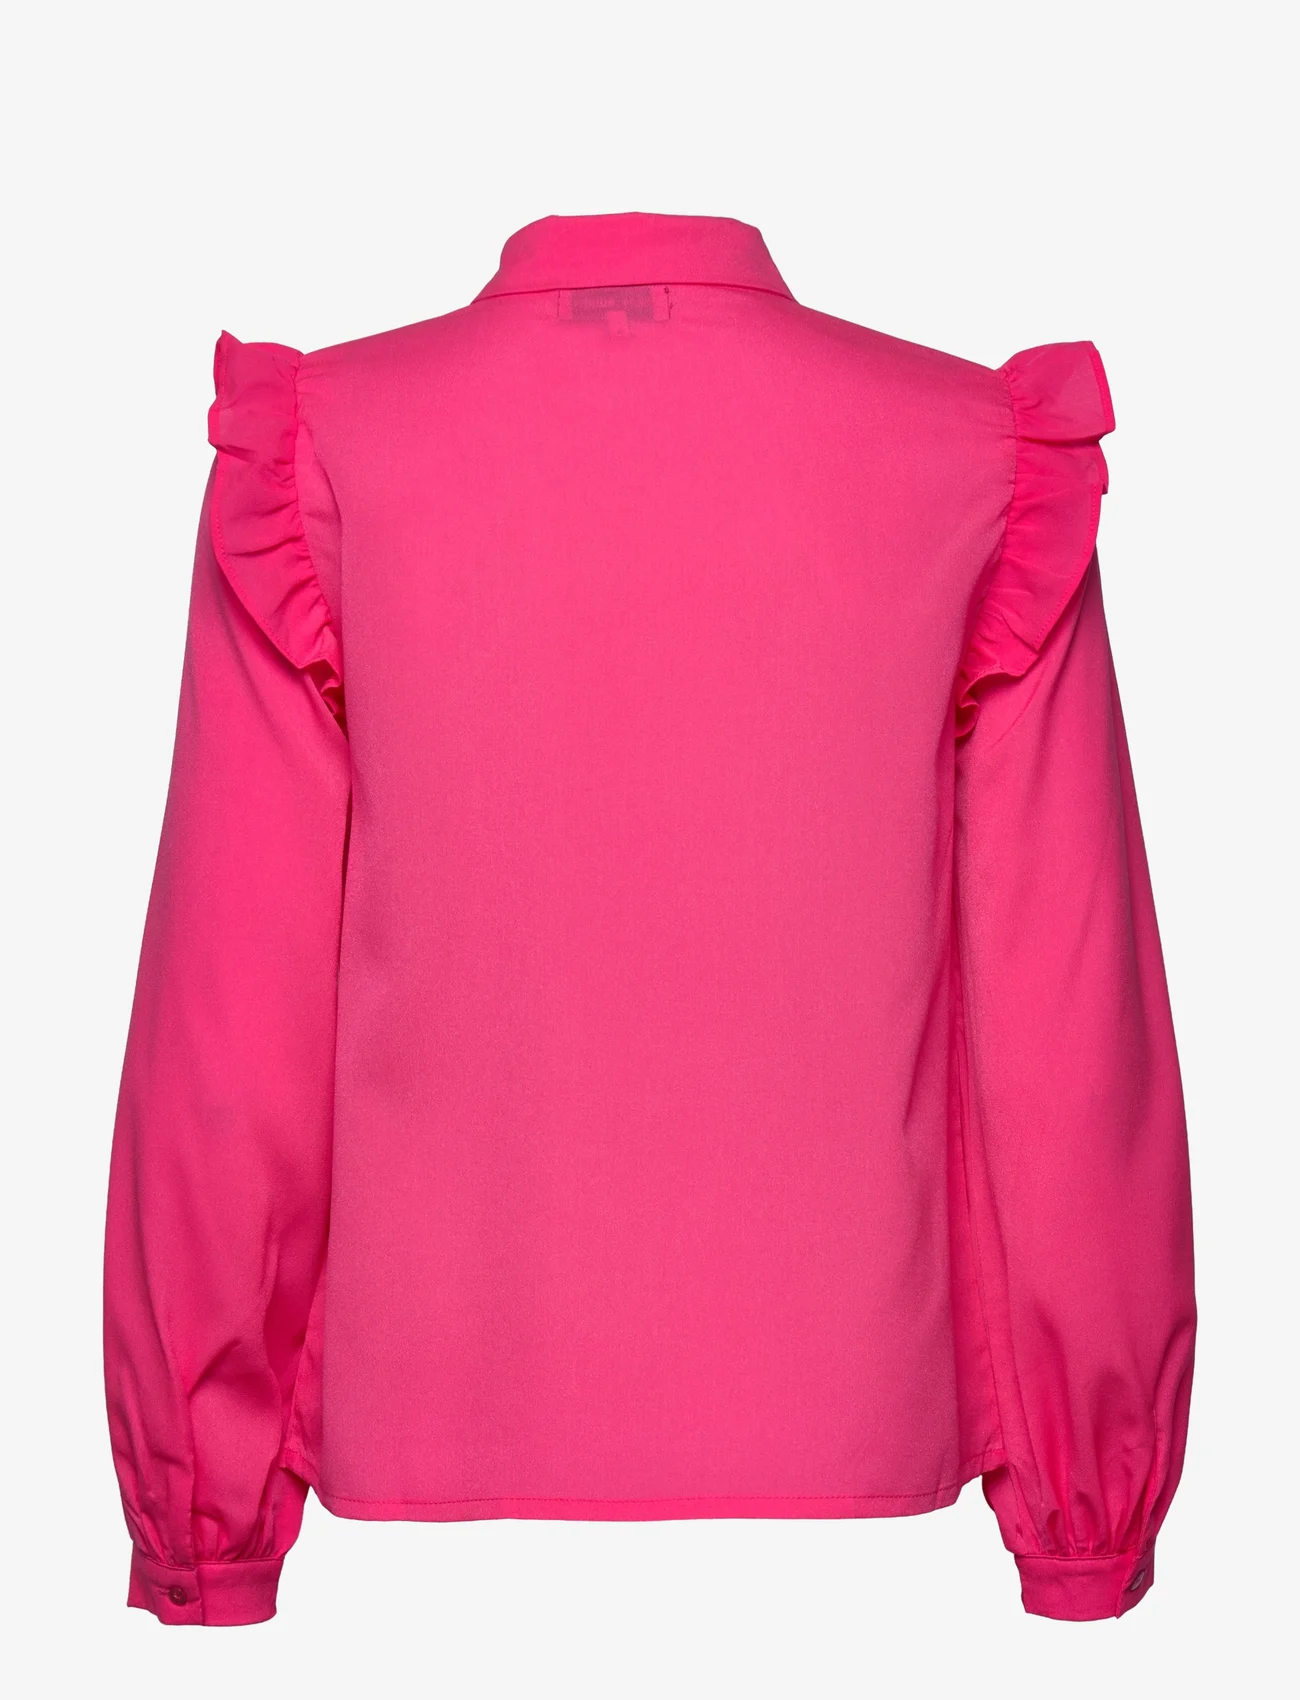 Lollys Laundry - Alexis Shirt - 98 neon pink - 1